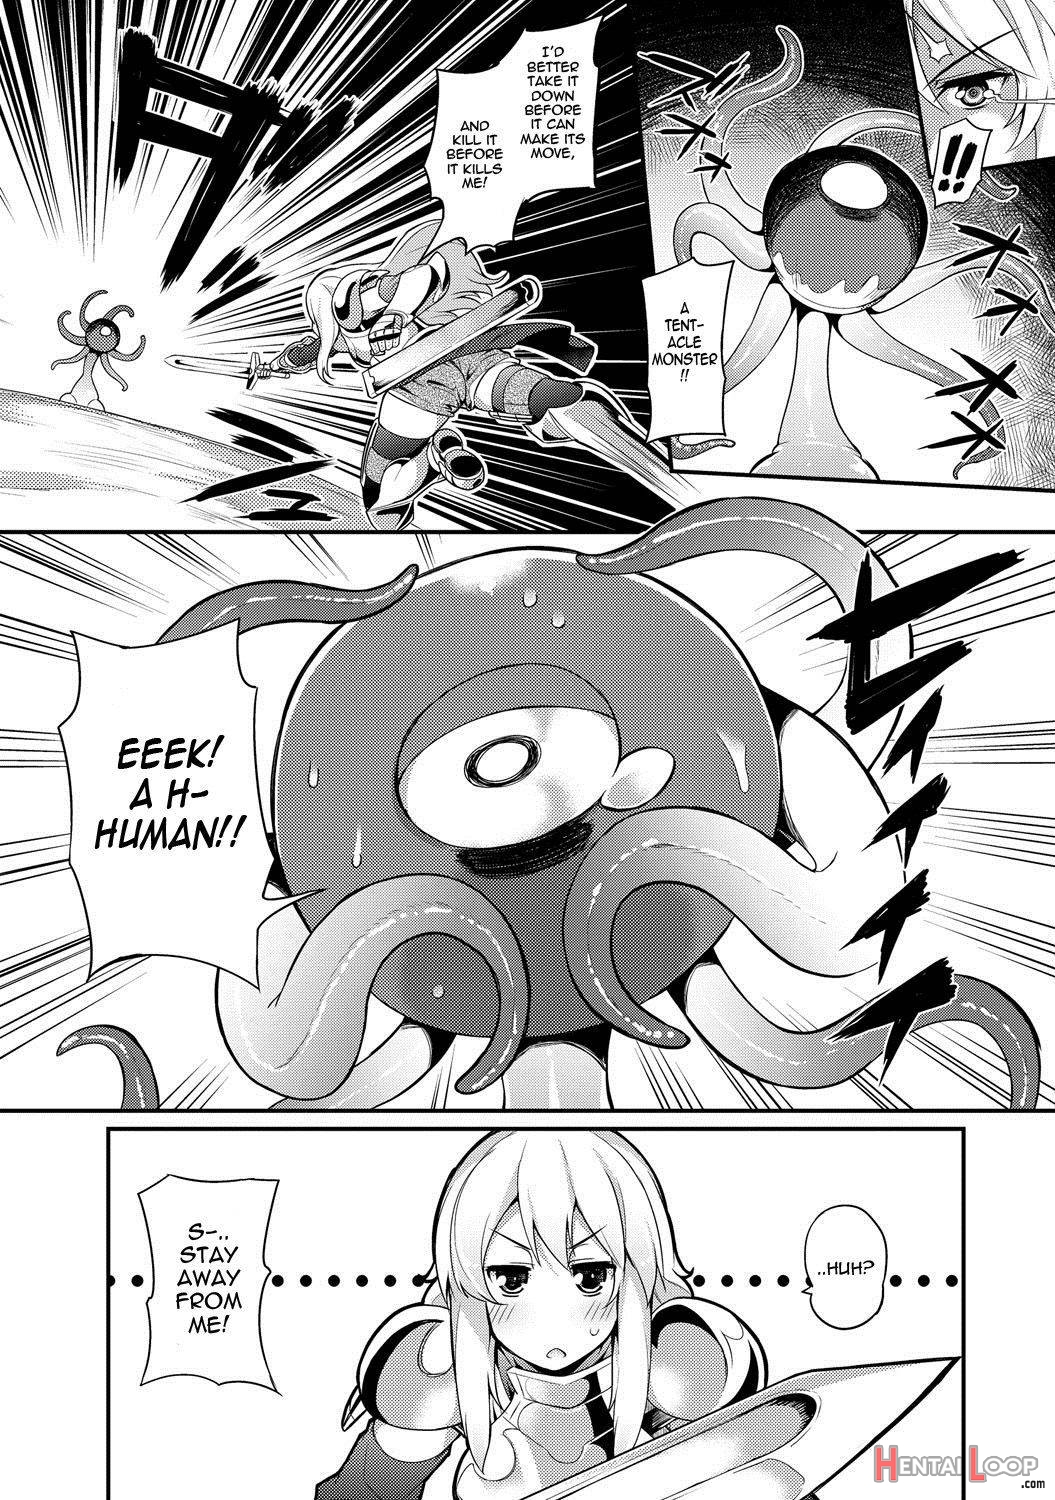 Tentacles Training page 2